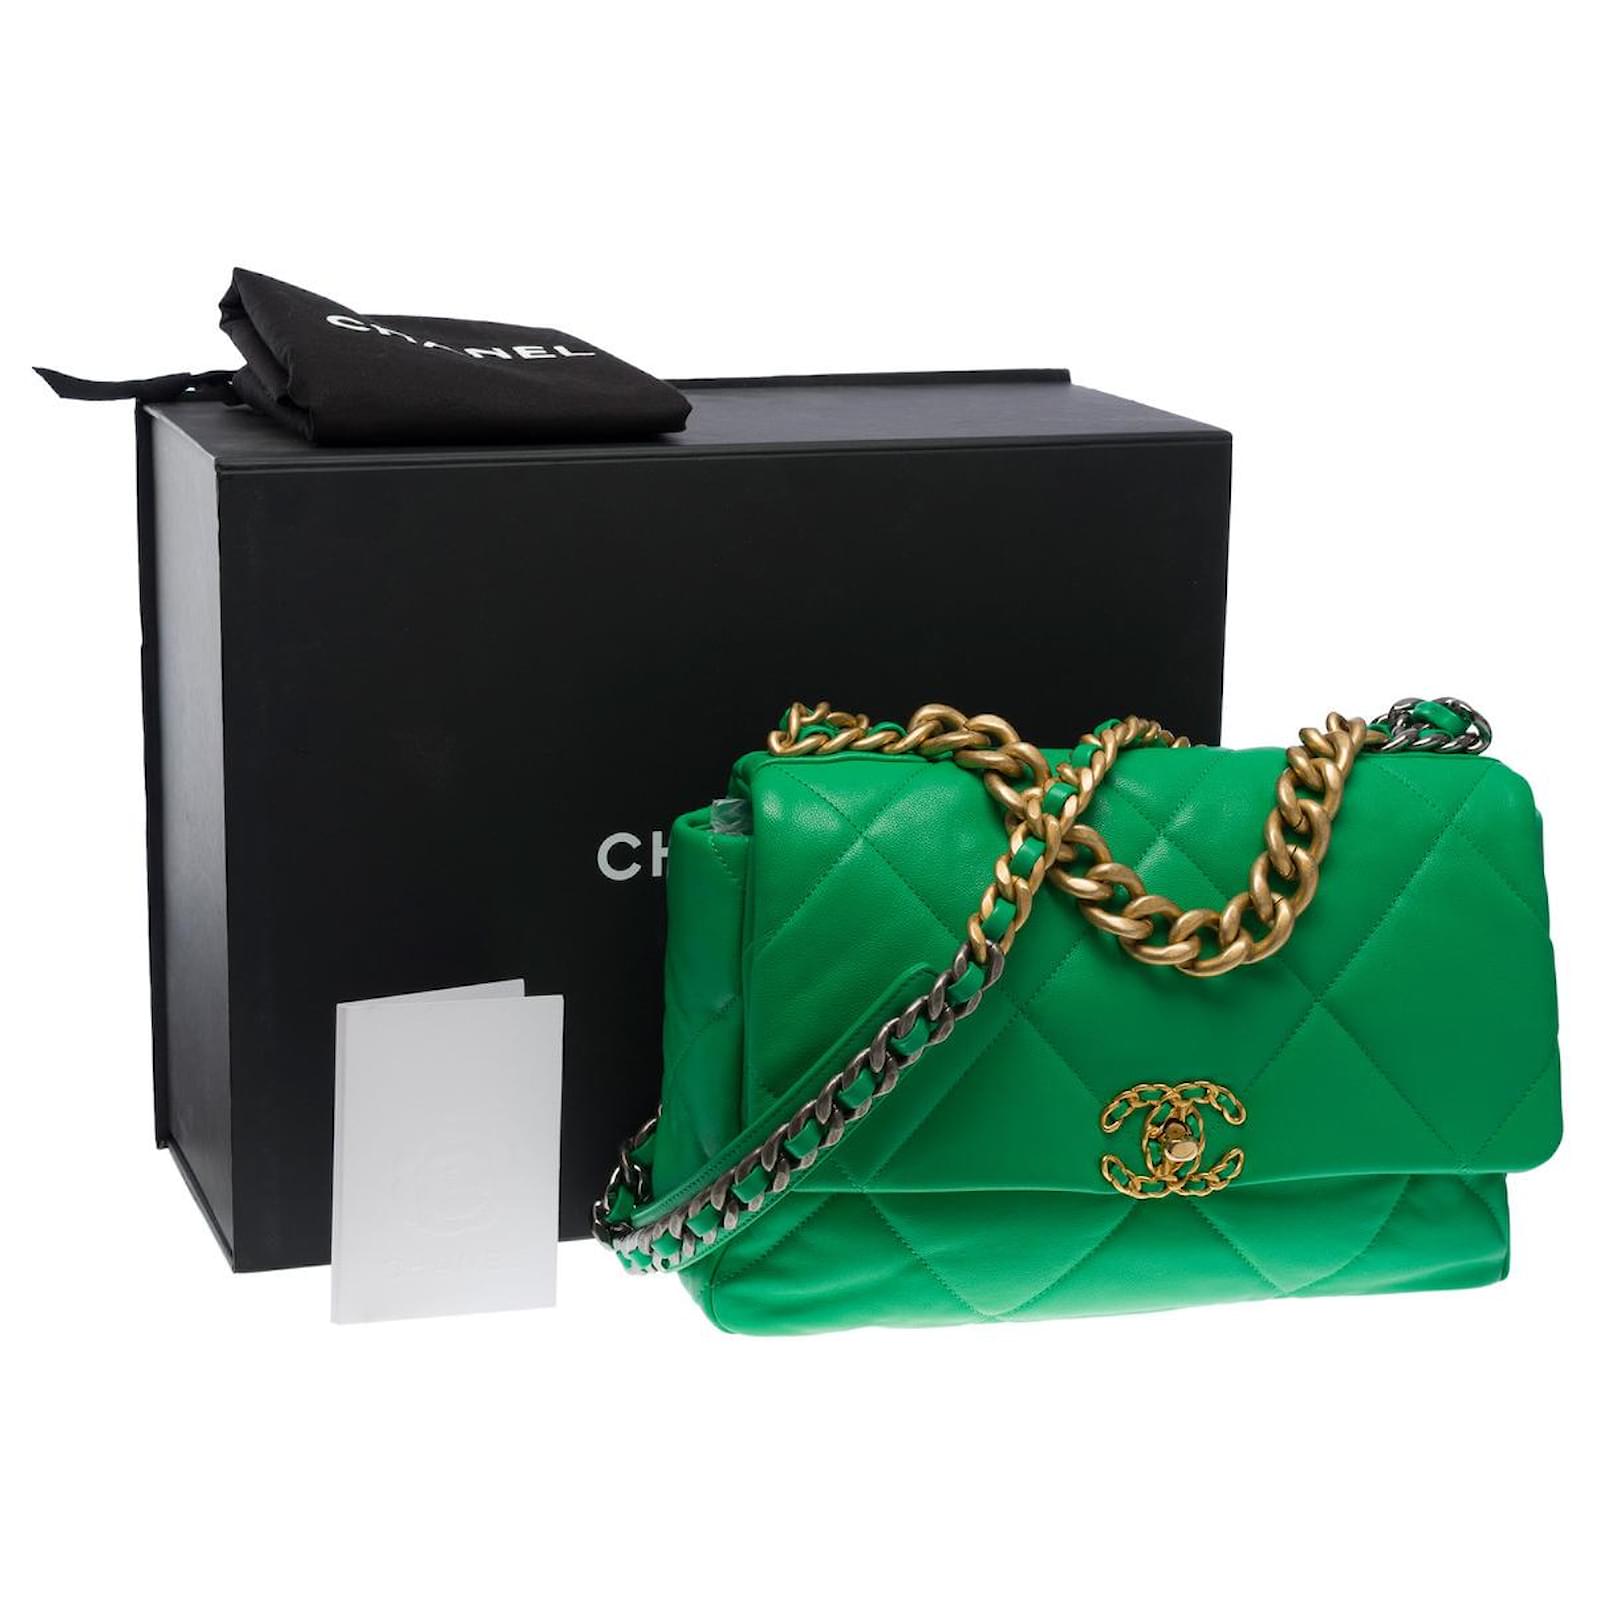 Chanel 19 leather handbag Chanel Green in Leather - 25251083